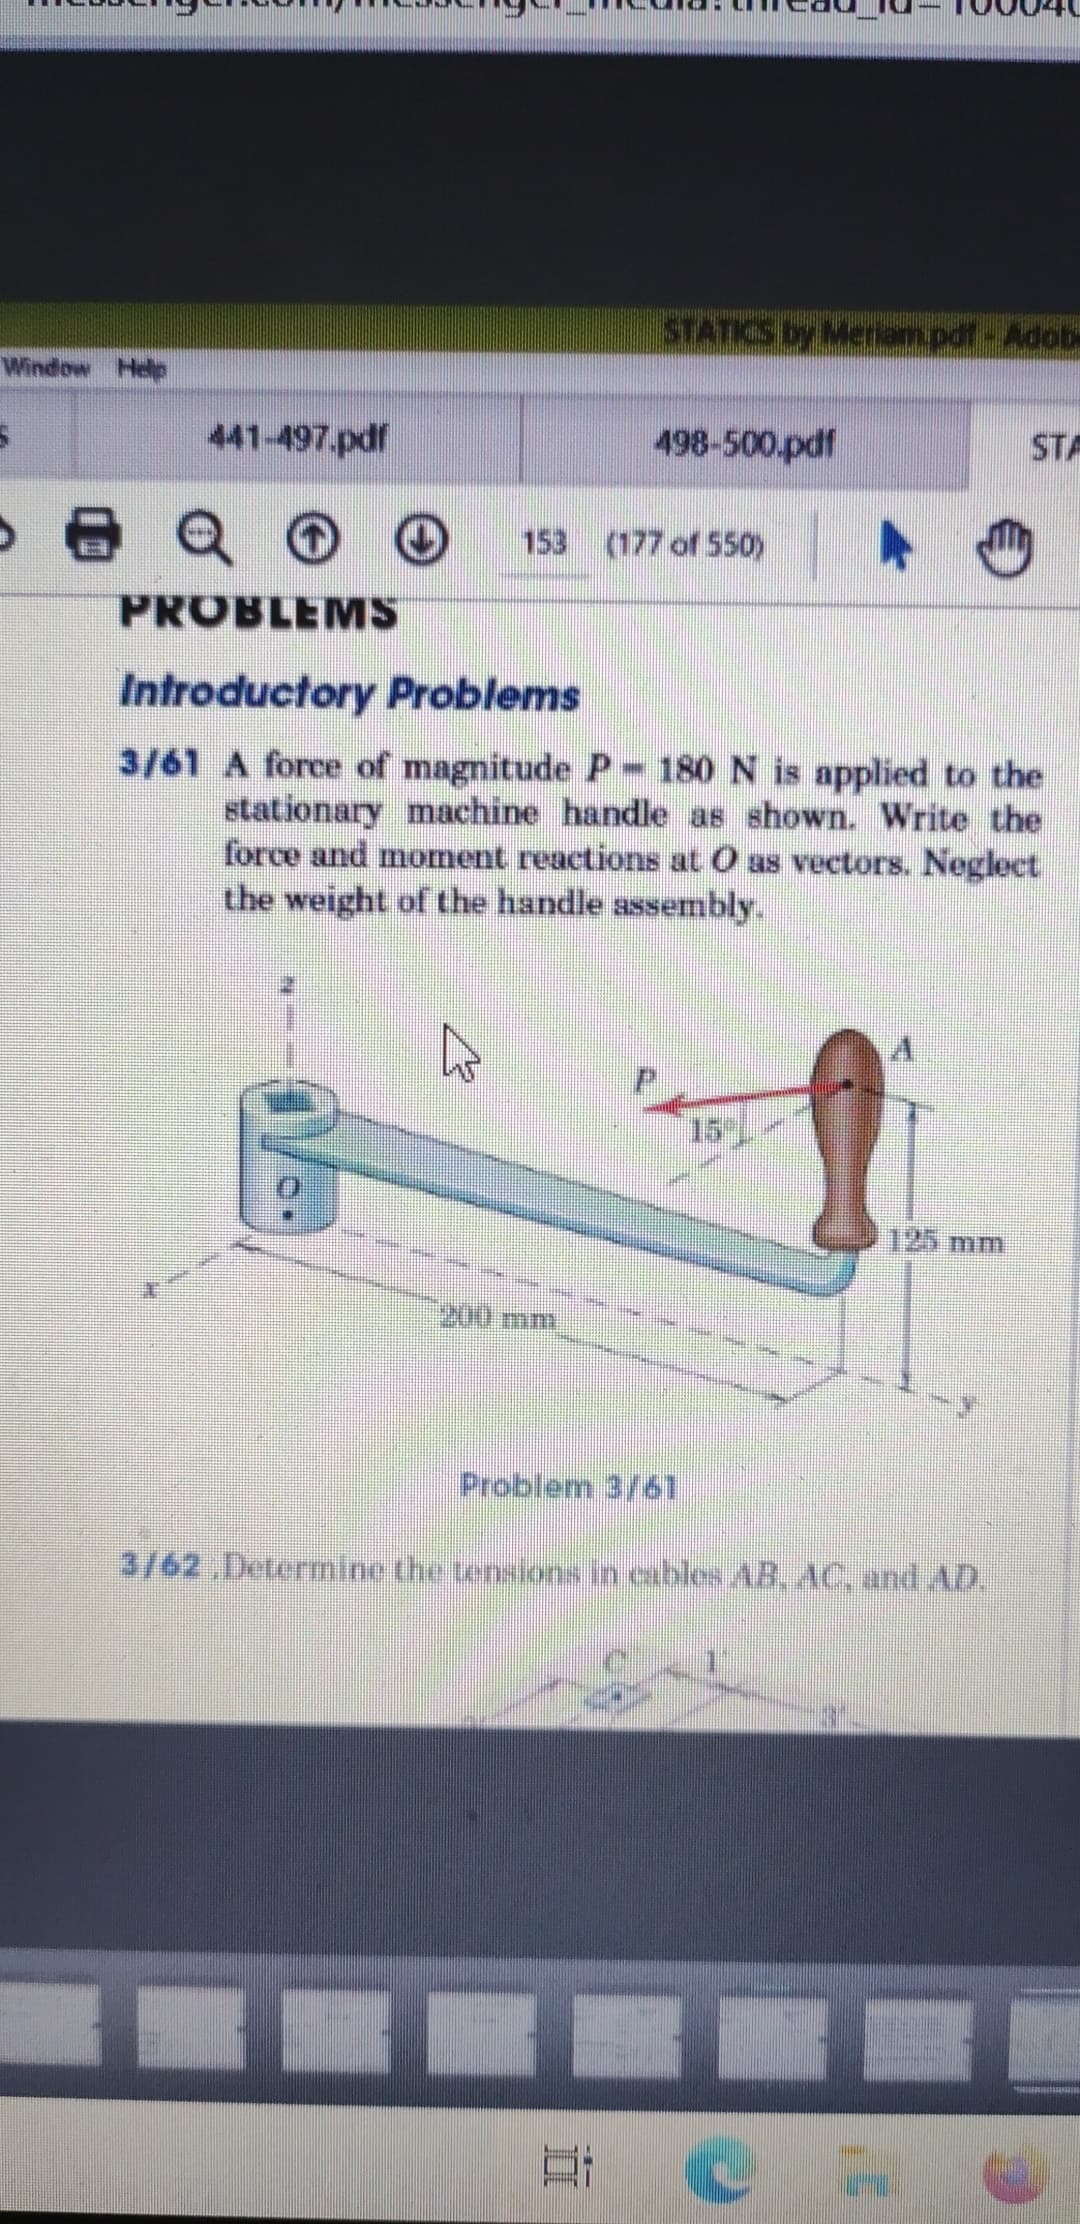 STATICS by Meriam.pdf-Adob
Window Help
441-497.pdf
498-500.pdf
STA
153 (177 of 550)
PROBLEMS
Introductory Problems
3/61 A force of magnitude P-180 N is applied to the
stationary machine handle as shown. Write the
force and moment reactions at O as vectors. Neglect
the weight of the handle assembly.
15)
125 mm
200 mm
Problem 3/61
3/62 Determine the tensions in cables AB, AC, and AD.
